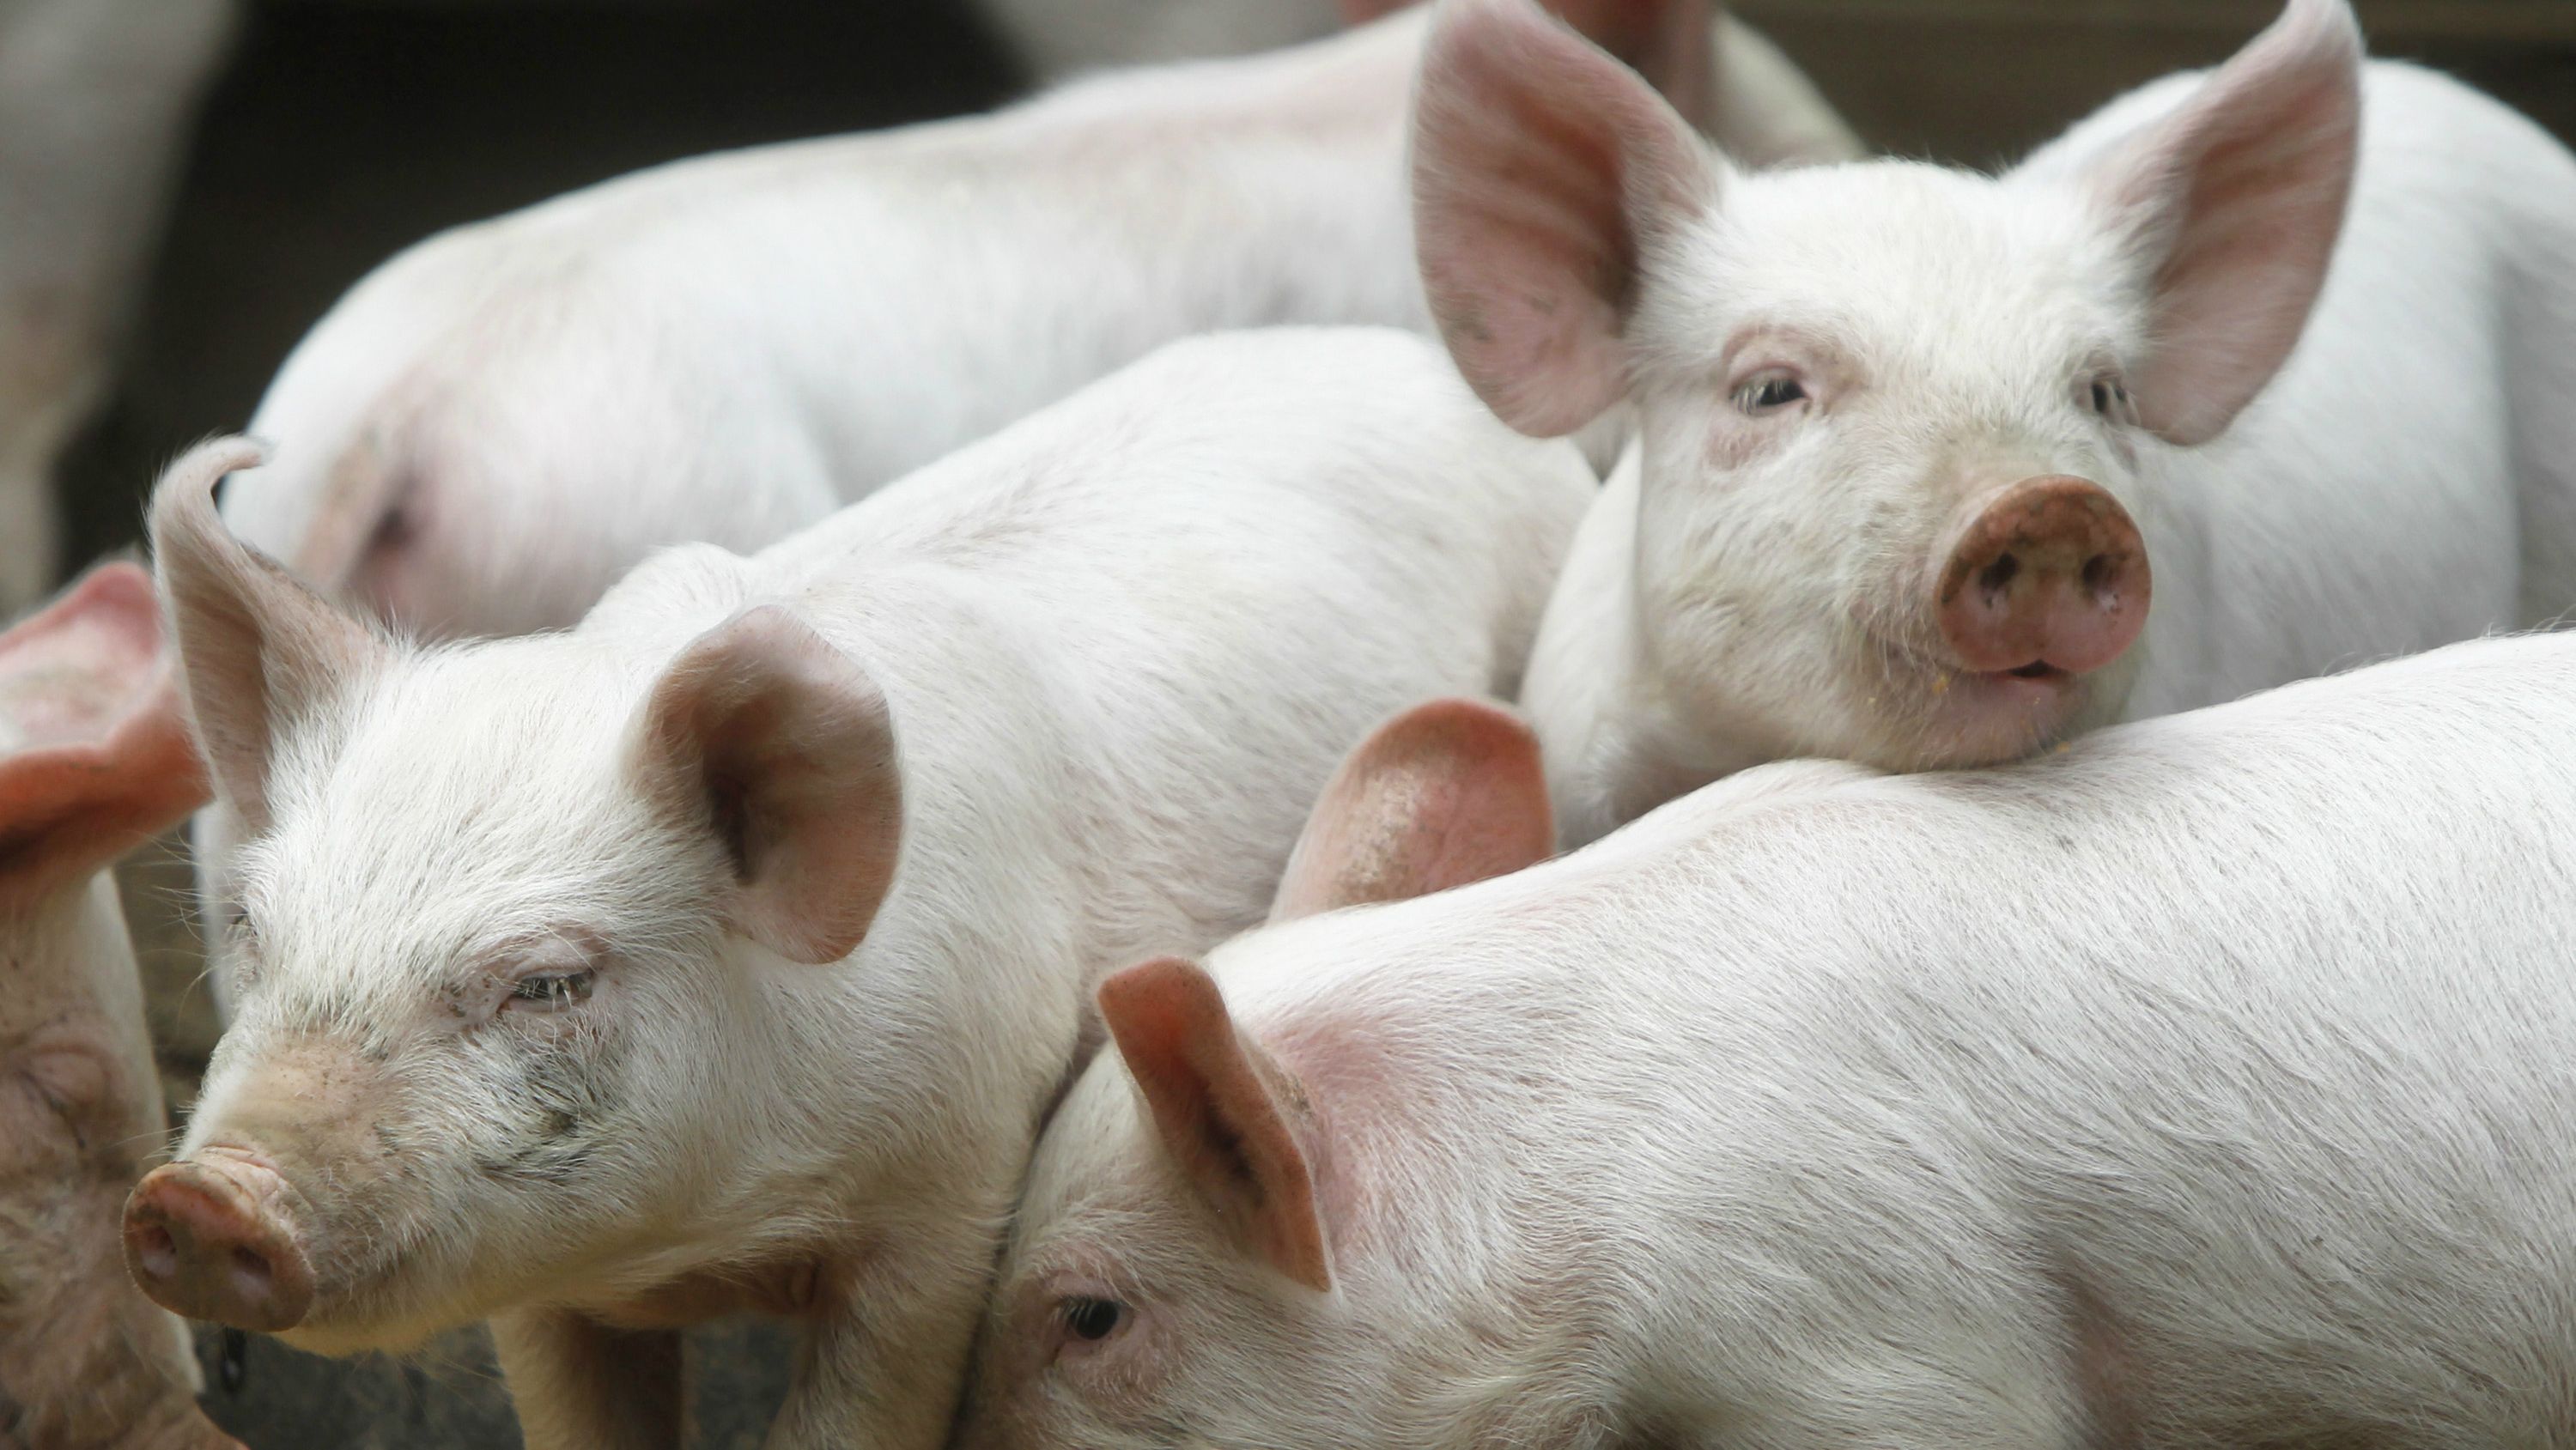 Jointly Funded Project Will Look for Gaps in US Pork Industry Biosecurity